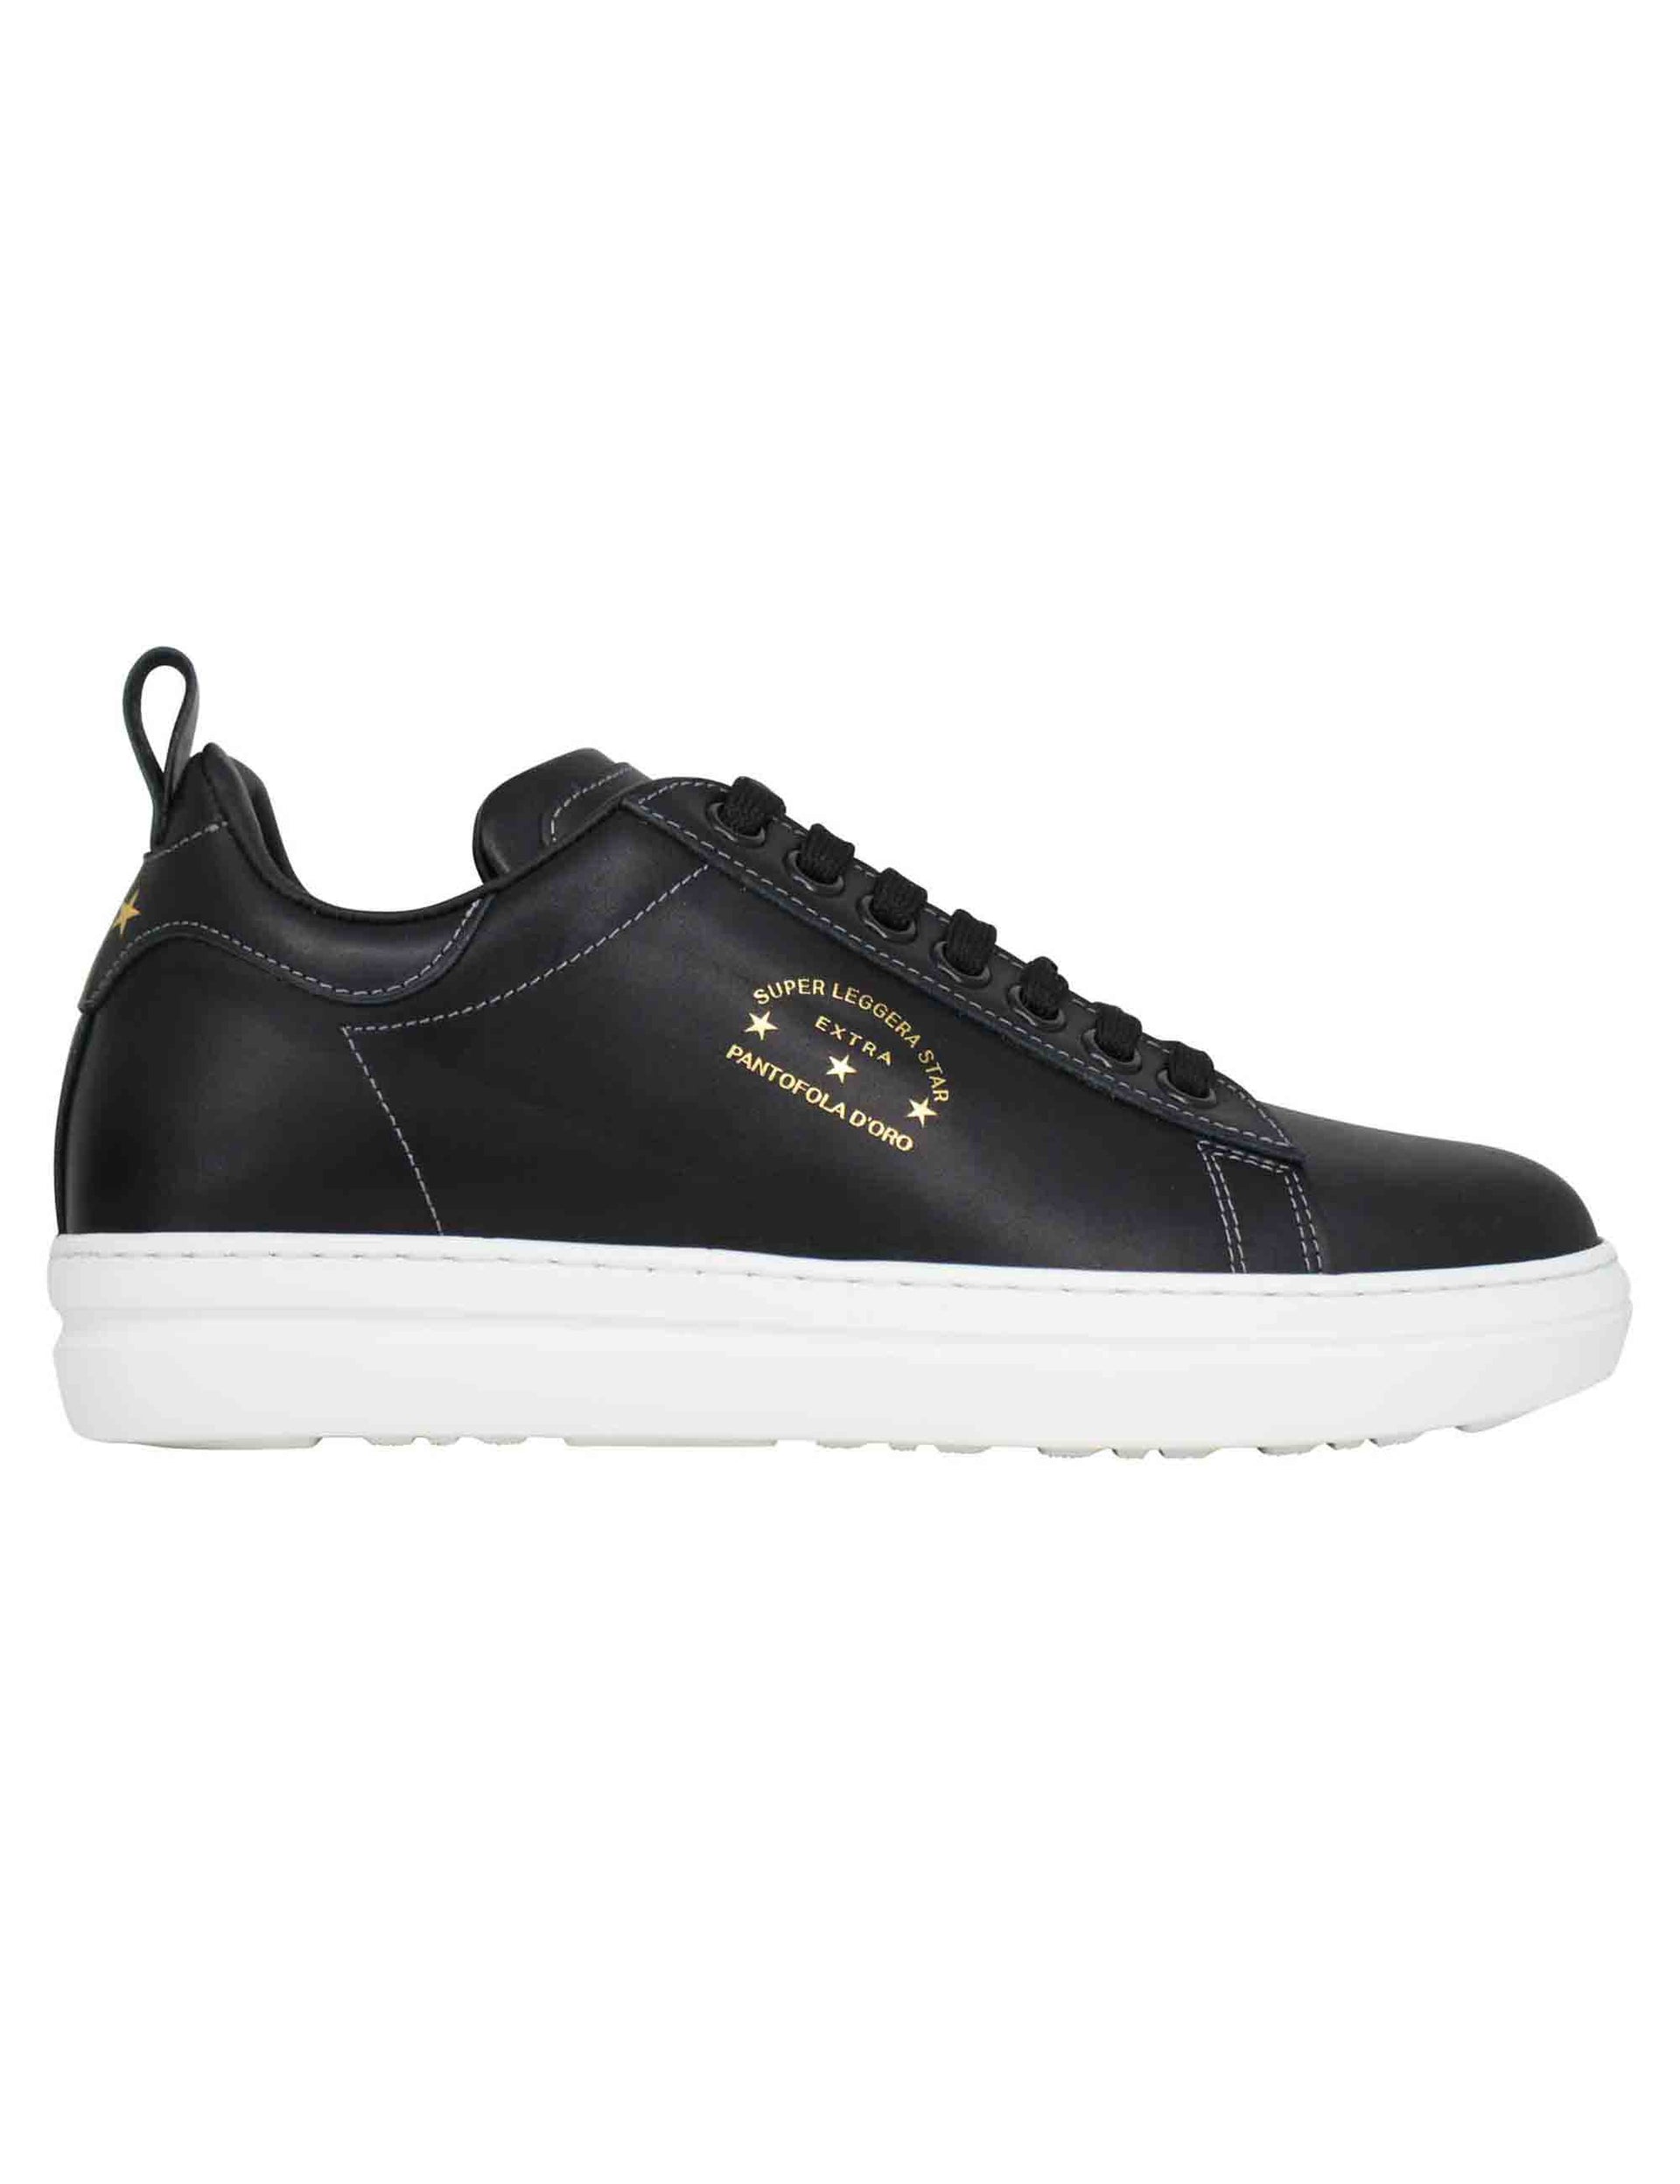 Court classic men's sneakers in black leather